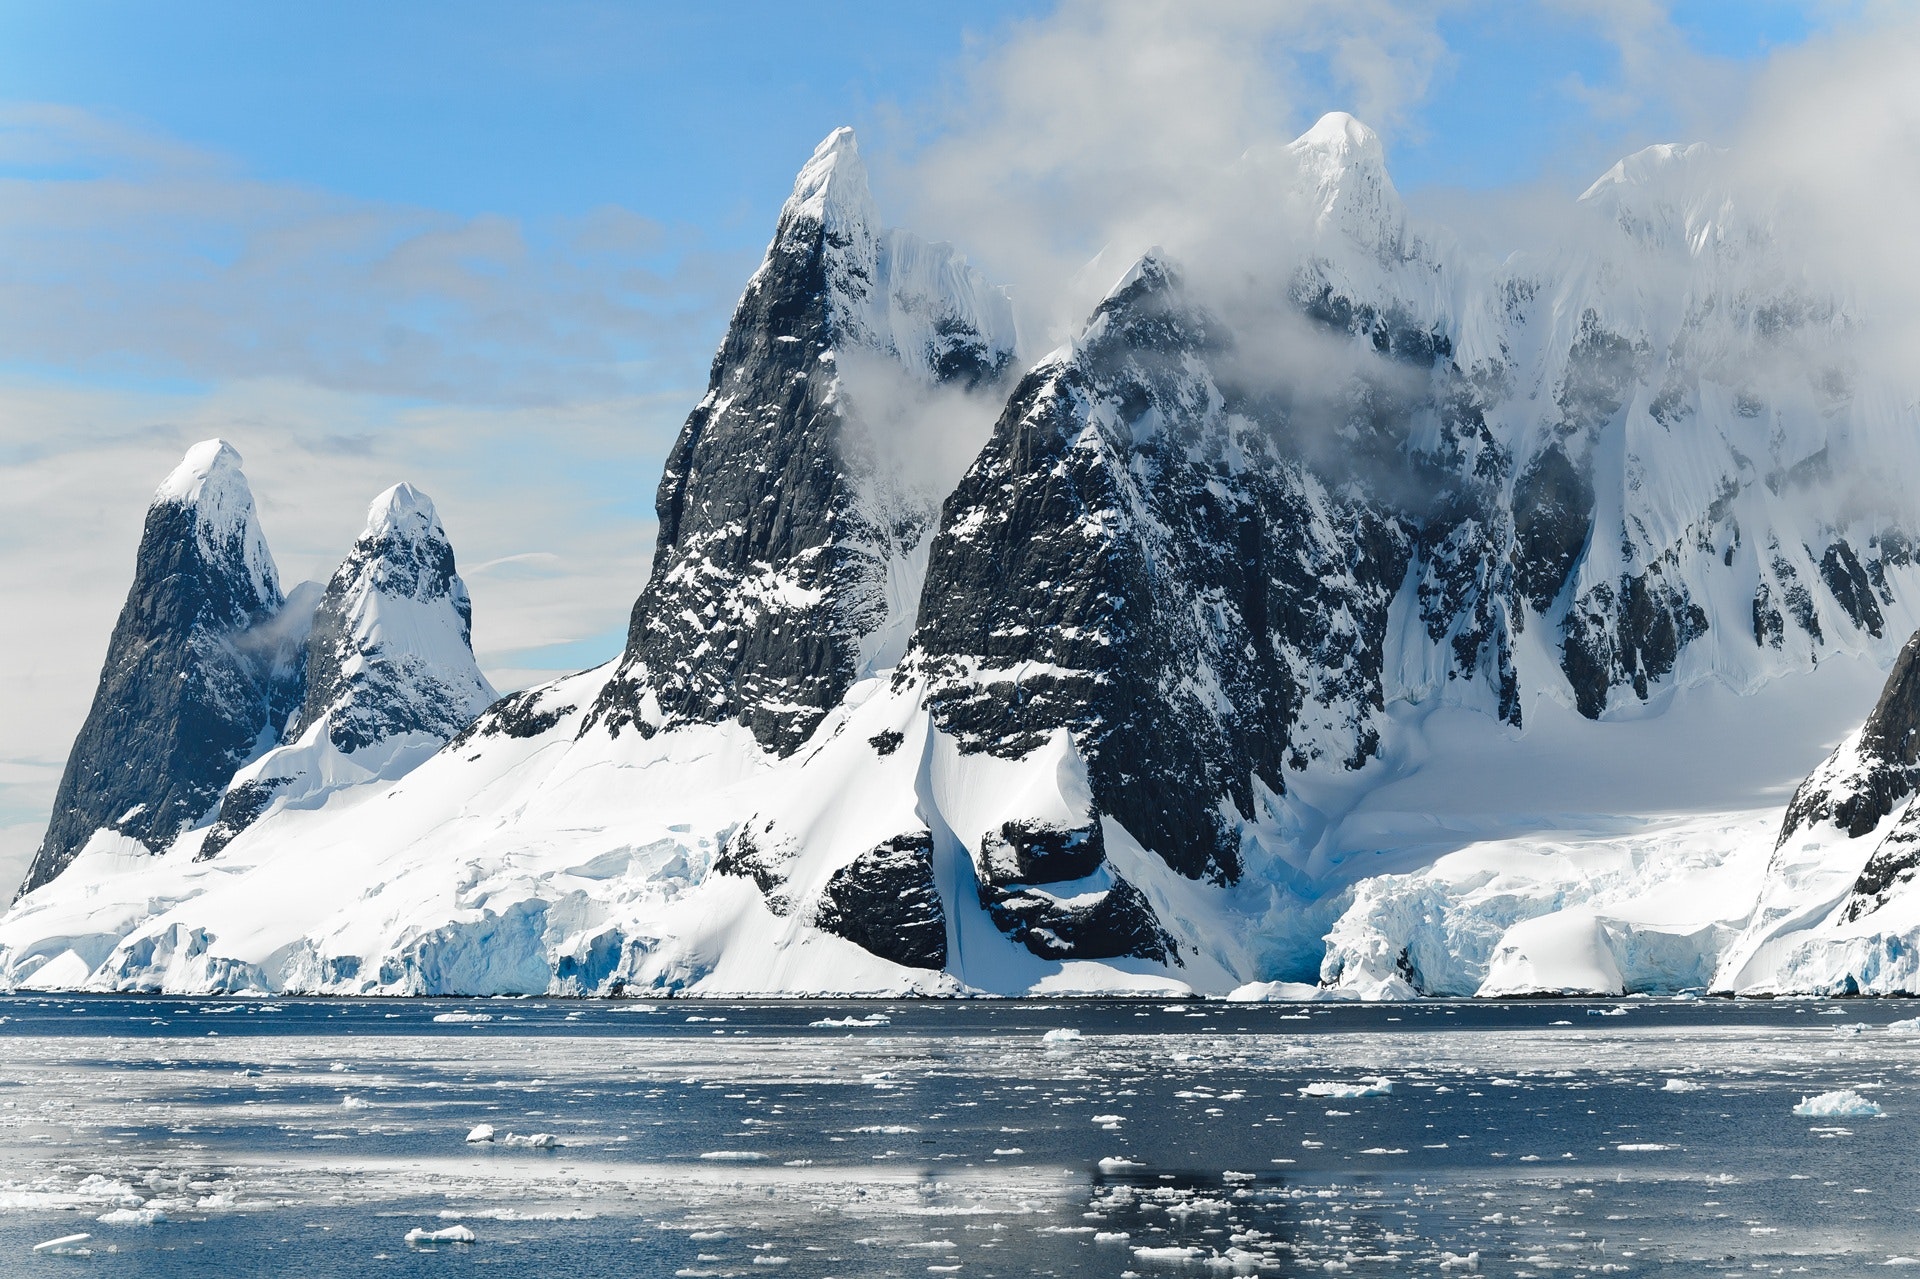 Antarctica Private Jet – An Adventure Into the Frozen Continent